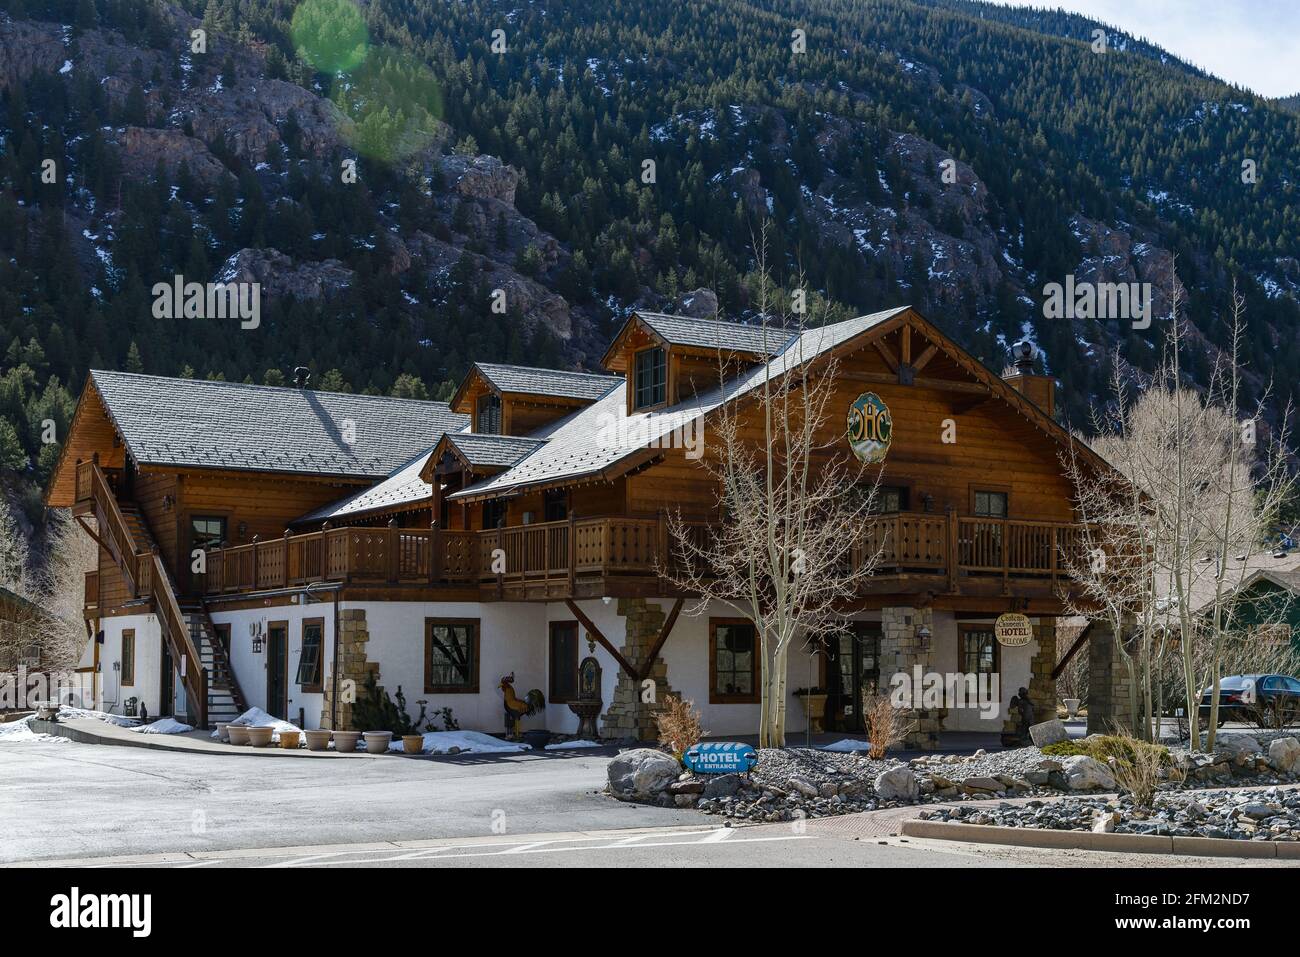 A charming mountain chalet at George, Colorado, USA. Stock Photo